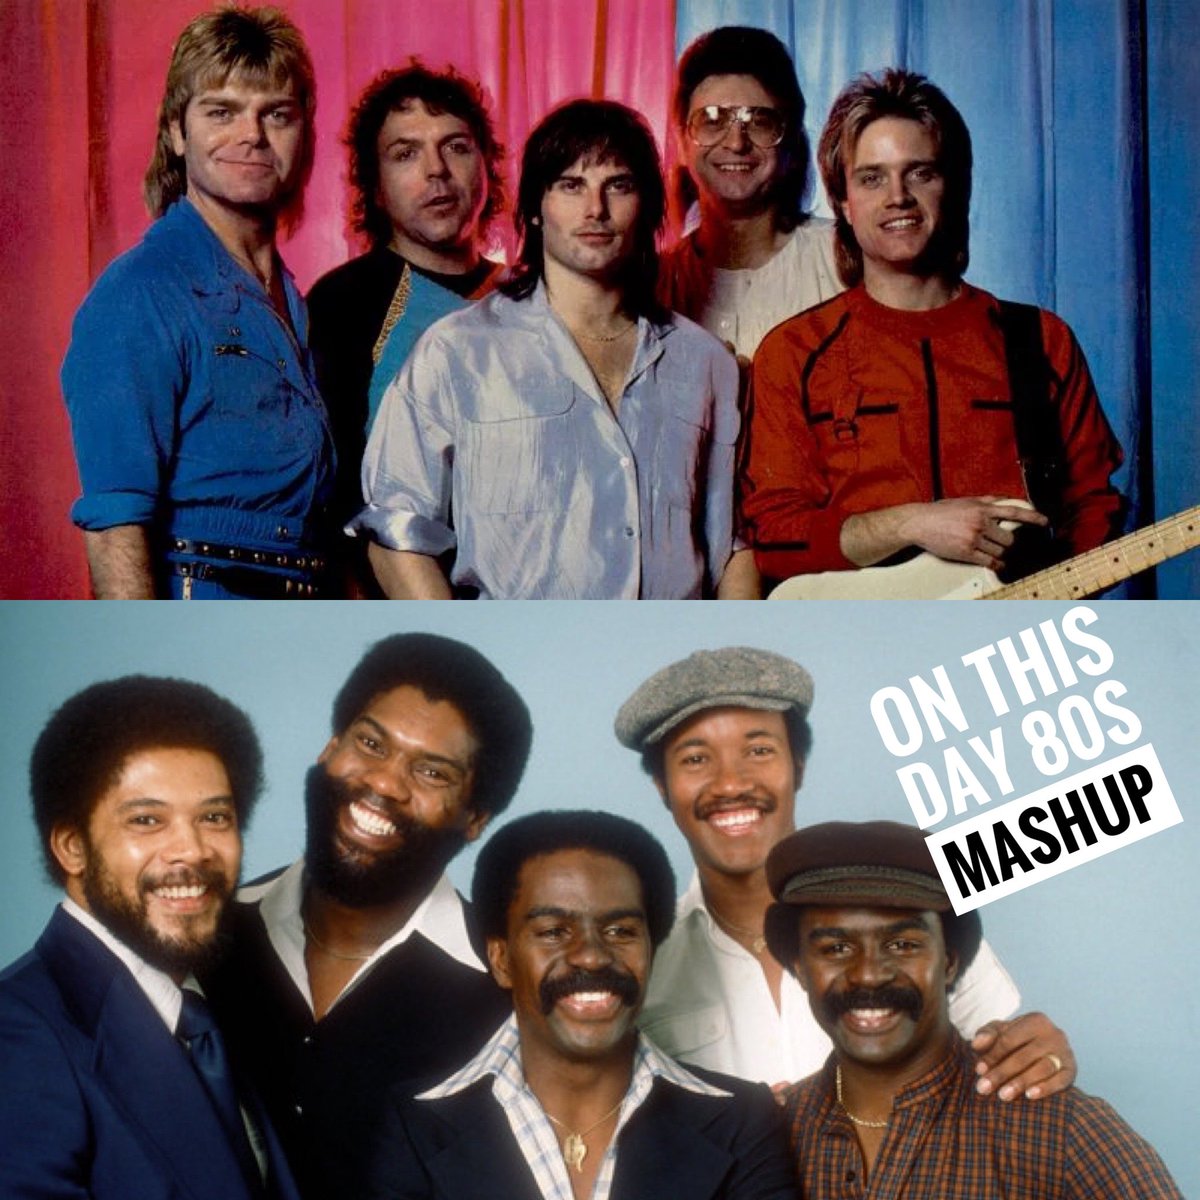 #OnThisDay80s

MASHUP

Survivor vs The Whispers

“Rocking The Eye Of The Tiger”

How to listen? Go to OnThisDay80s.com / OnThisDay80s.co.uk

#80s #80smusic #MashUp